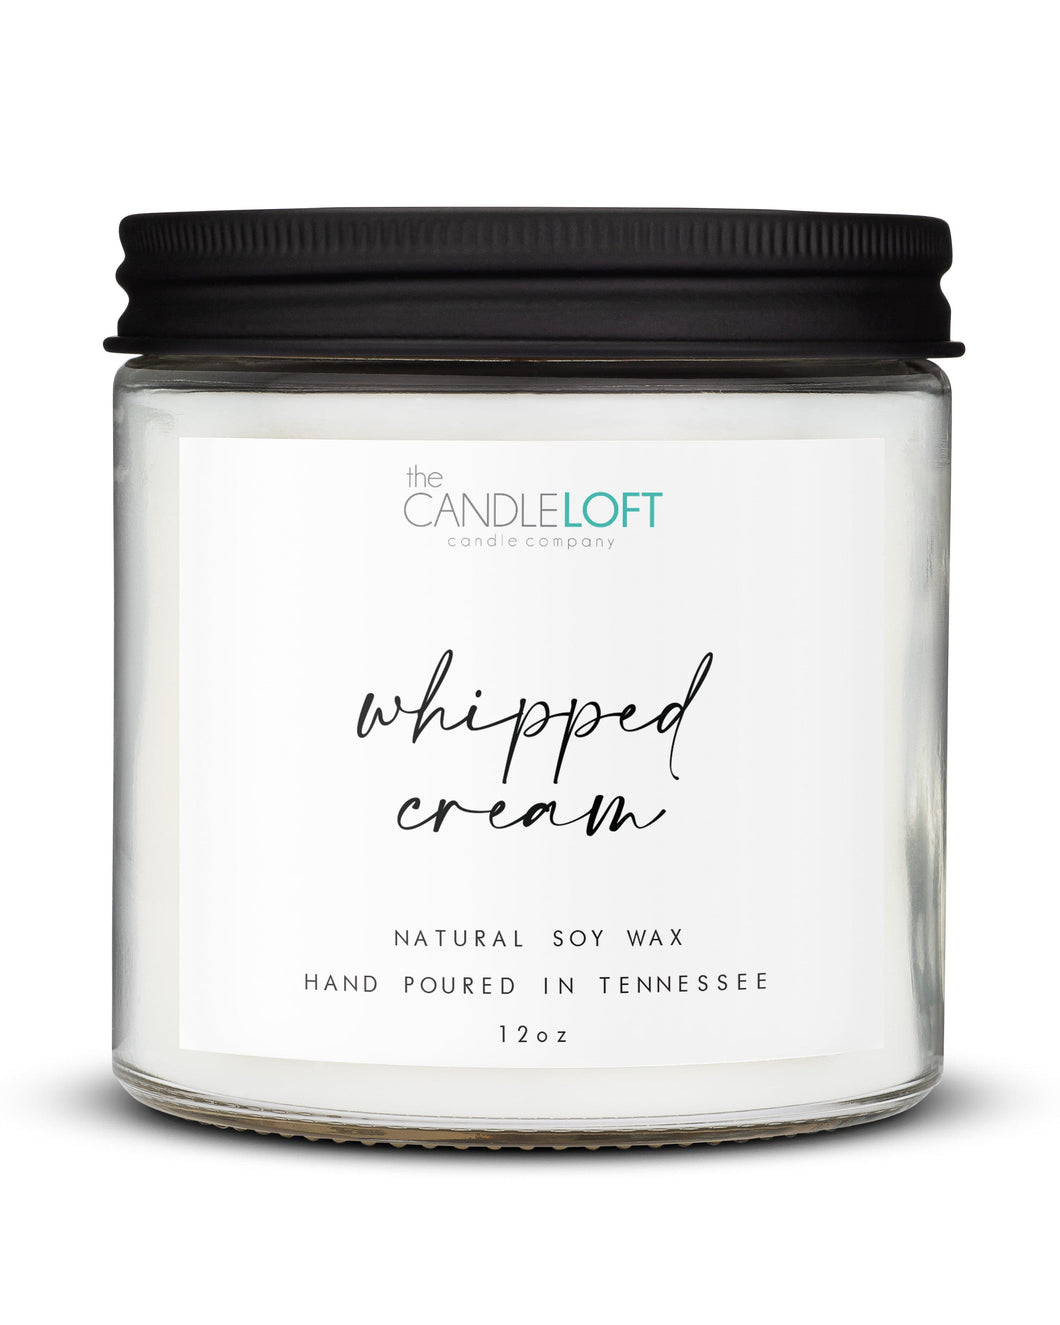 The Candle Loft Candles Signature 12oz Whipped Cream Candle